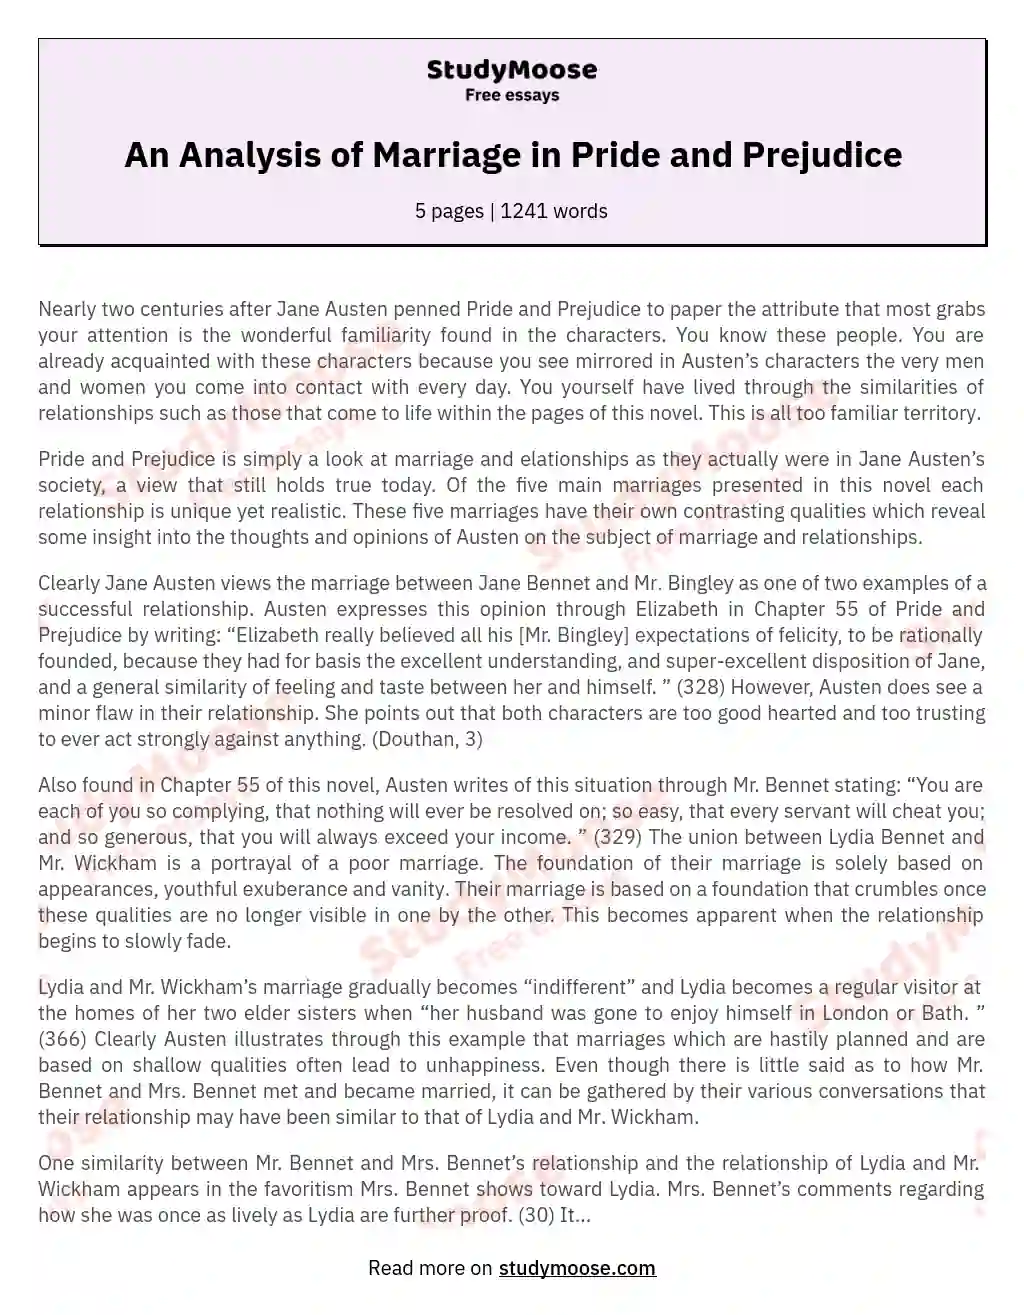 An Analysis of Marriage in Pride and Prejudice